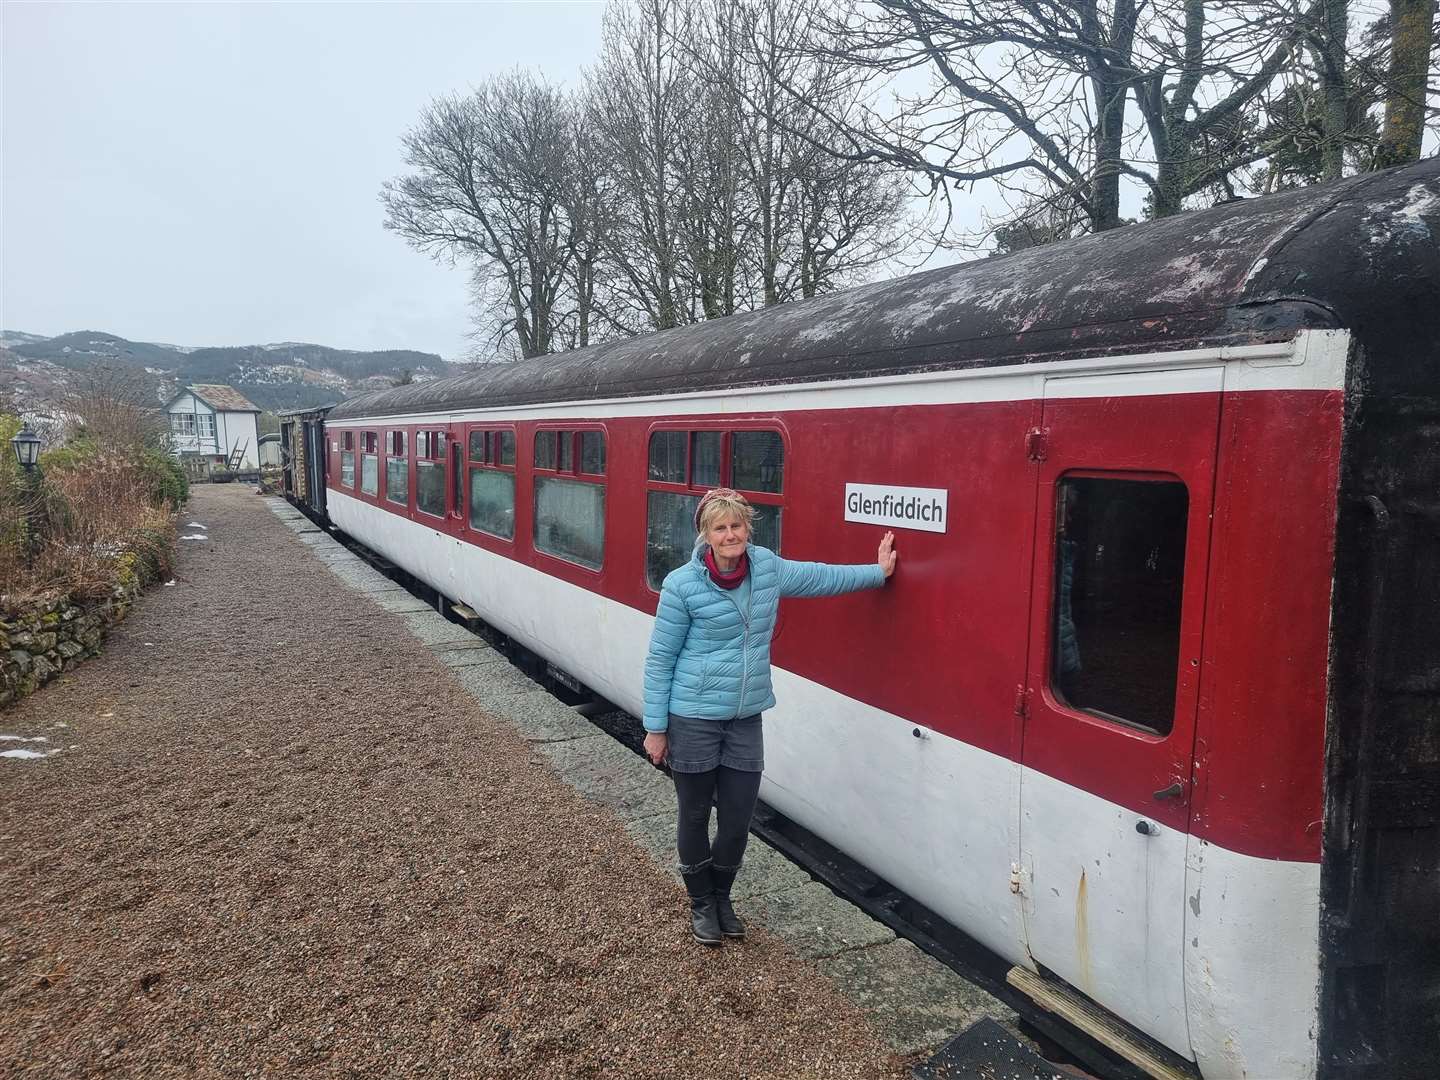 Kate Roach next to one of the Sleeperzzz carriages.